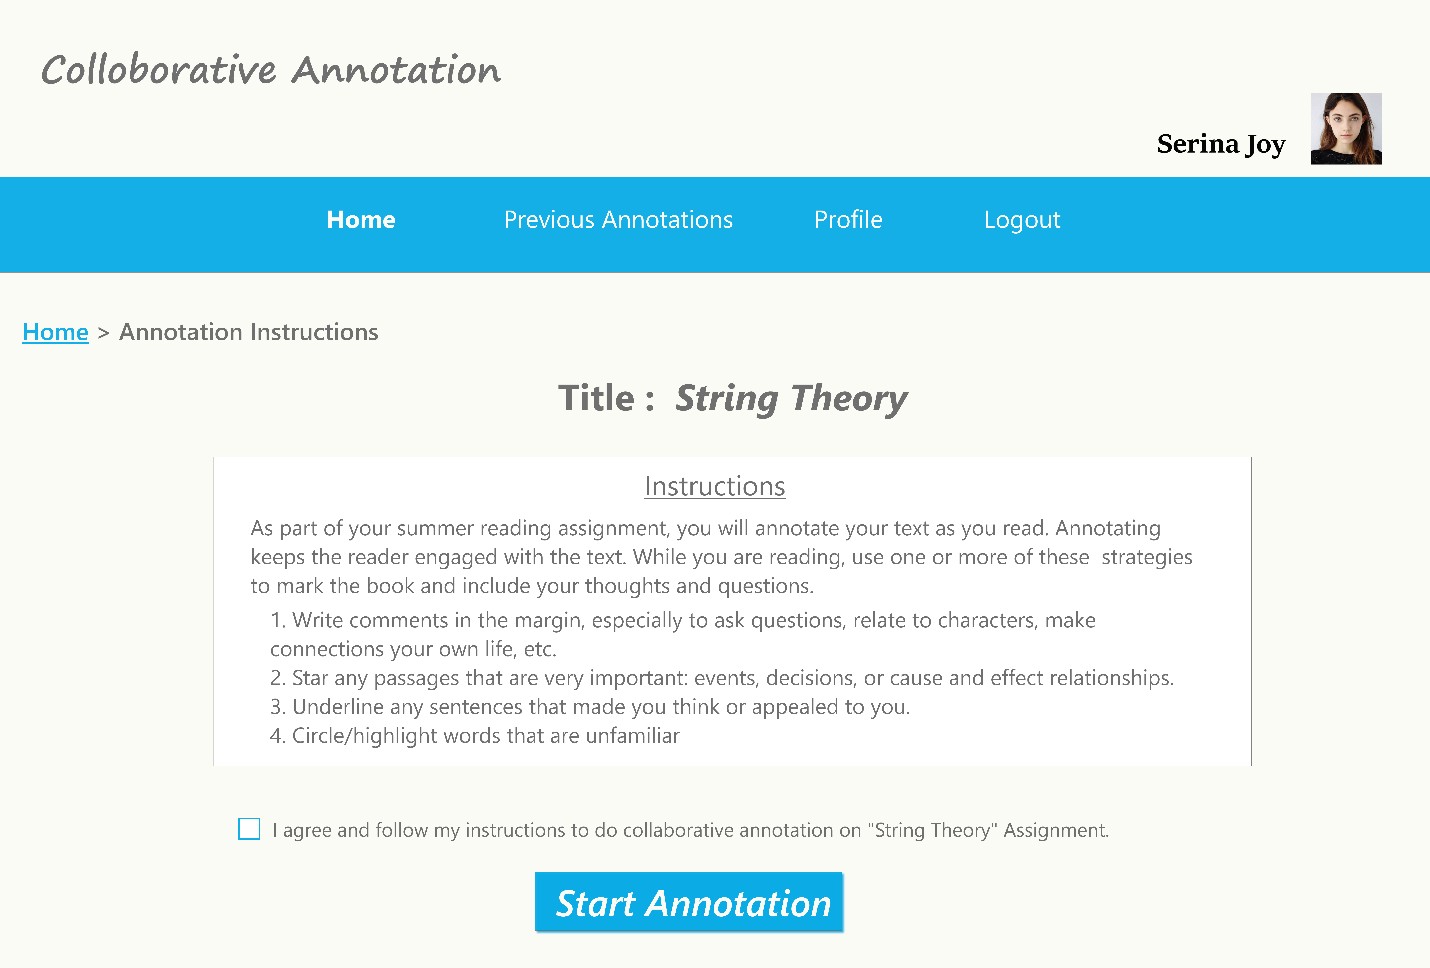 Annotations Instructions page